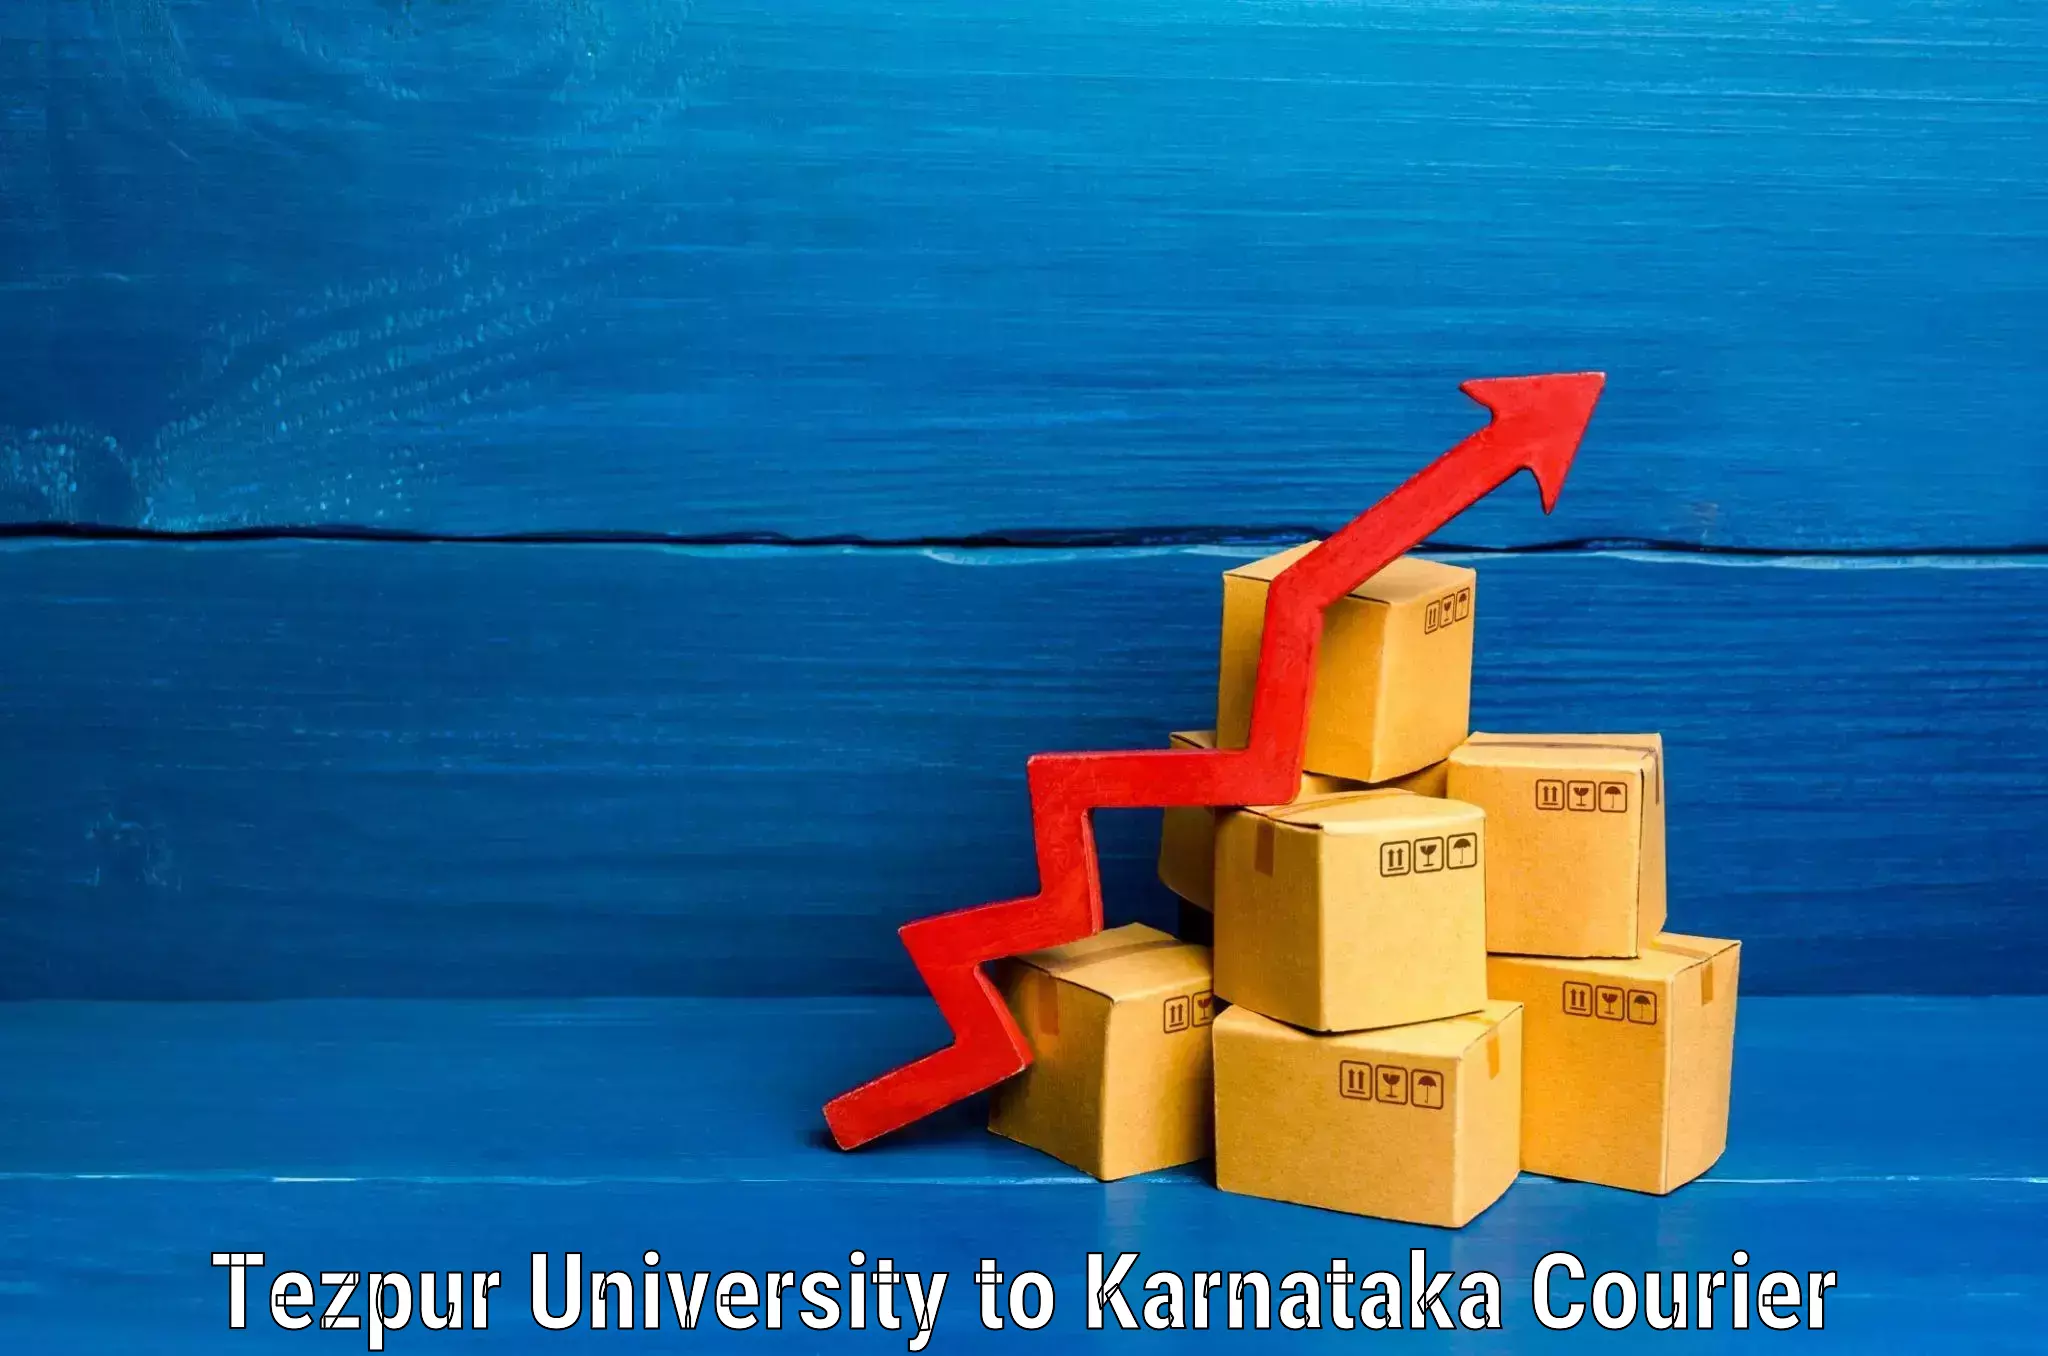 Luggage delivery logistics in Tezpur University to Kollegal